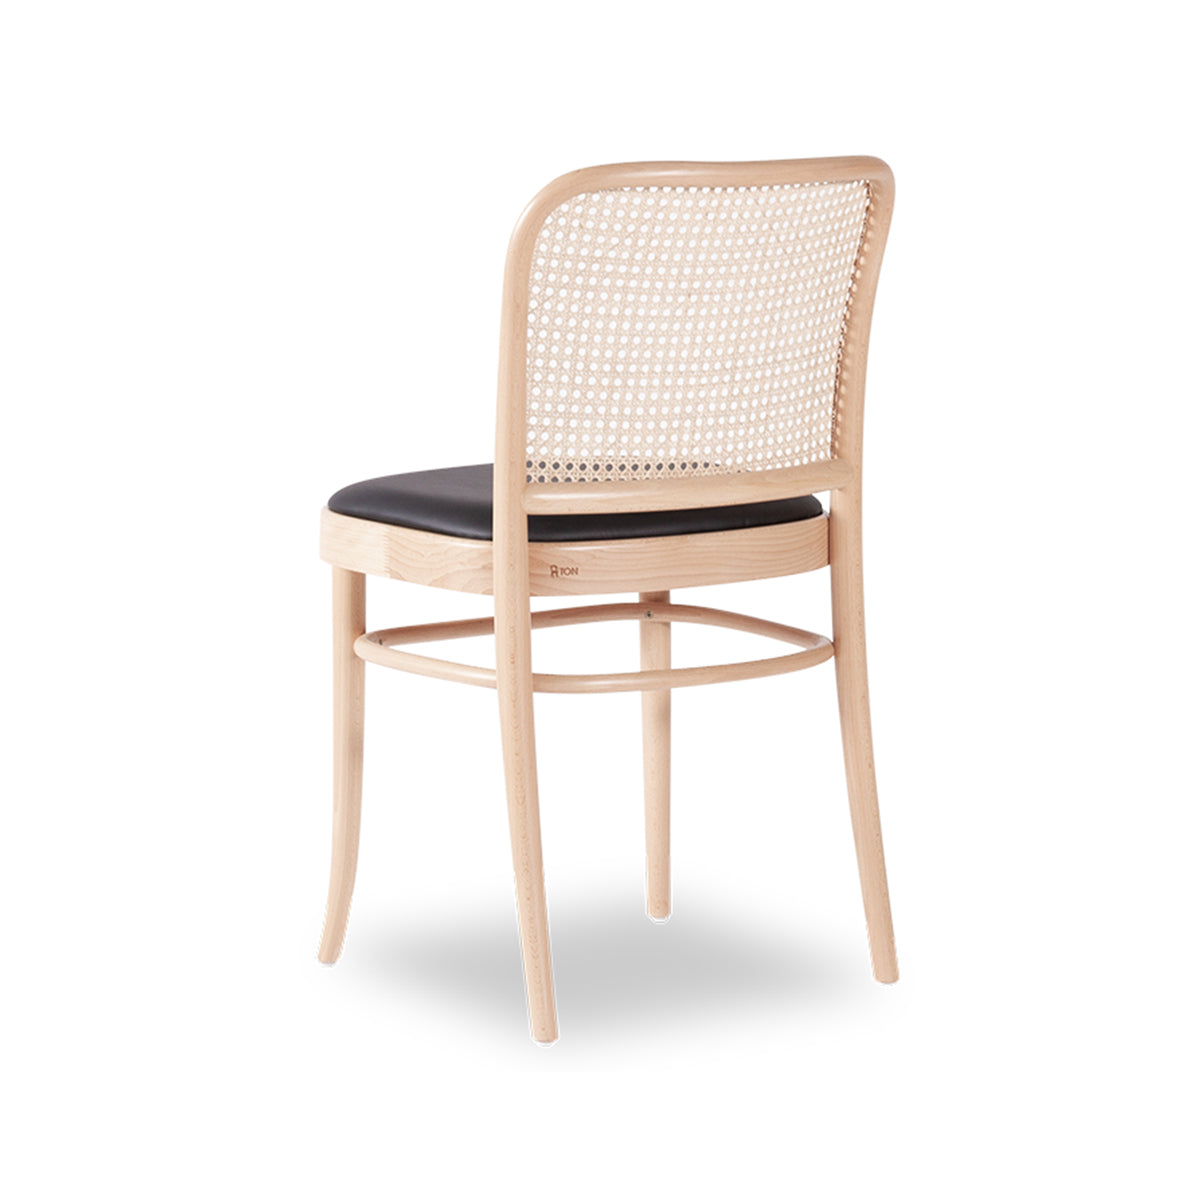 811 Hoffmann Chair - Padded Seat/Cane Backrest (Natural).